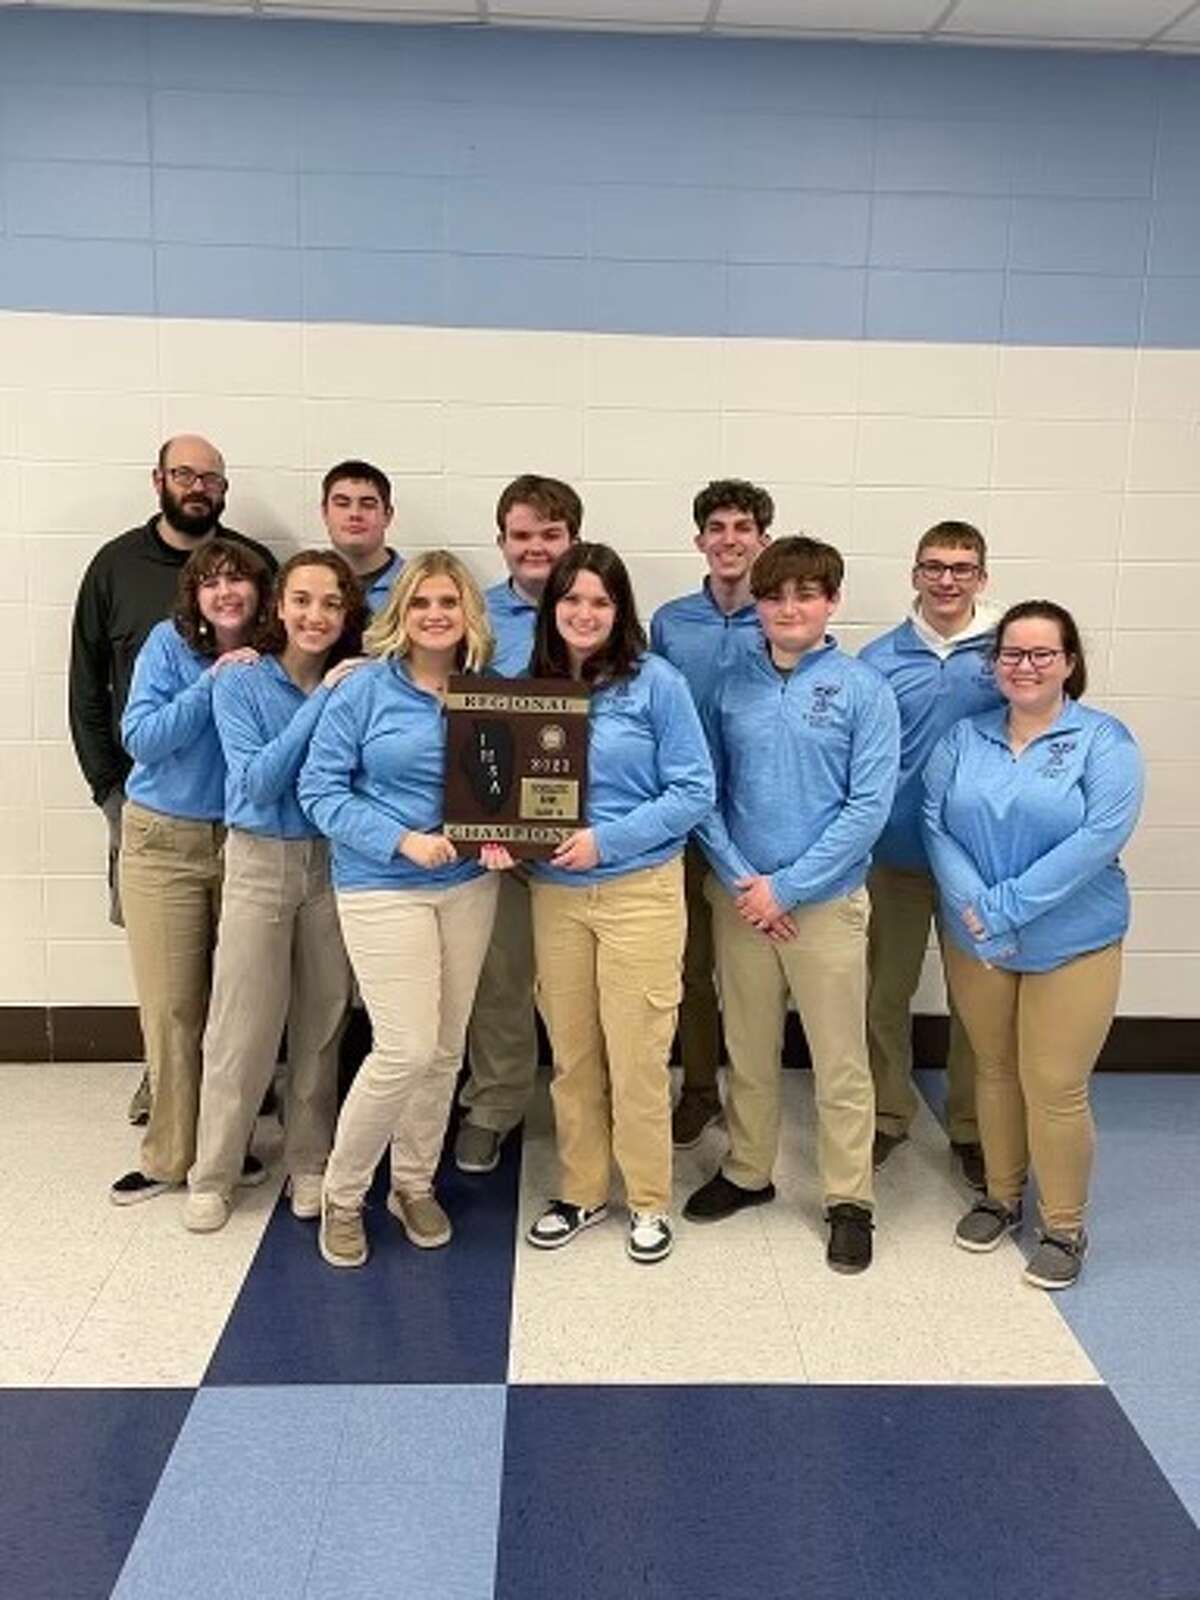 The Triopia scholastic bowl team took first place during the 2022-23 regional competition at Triopia. 